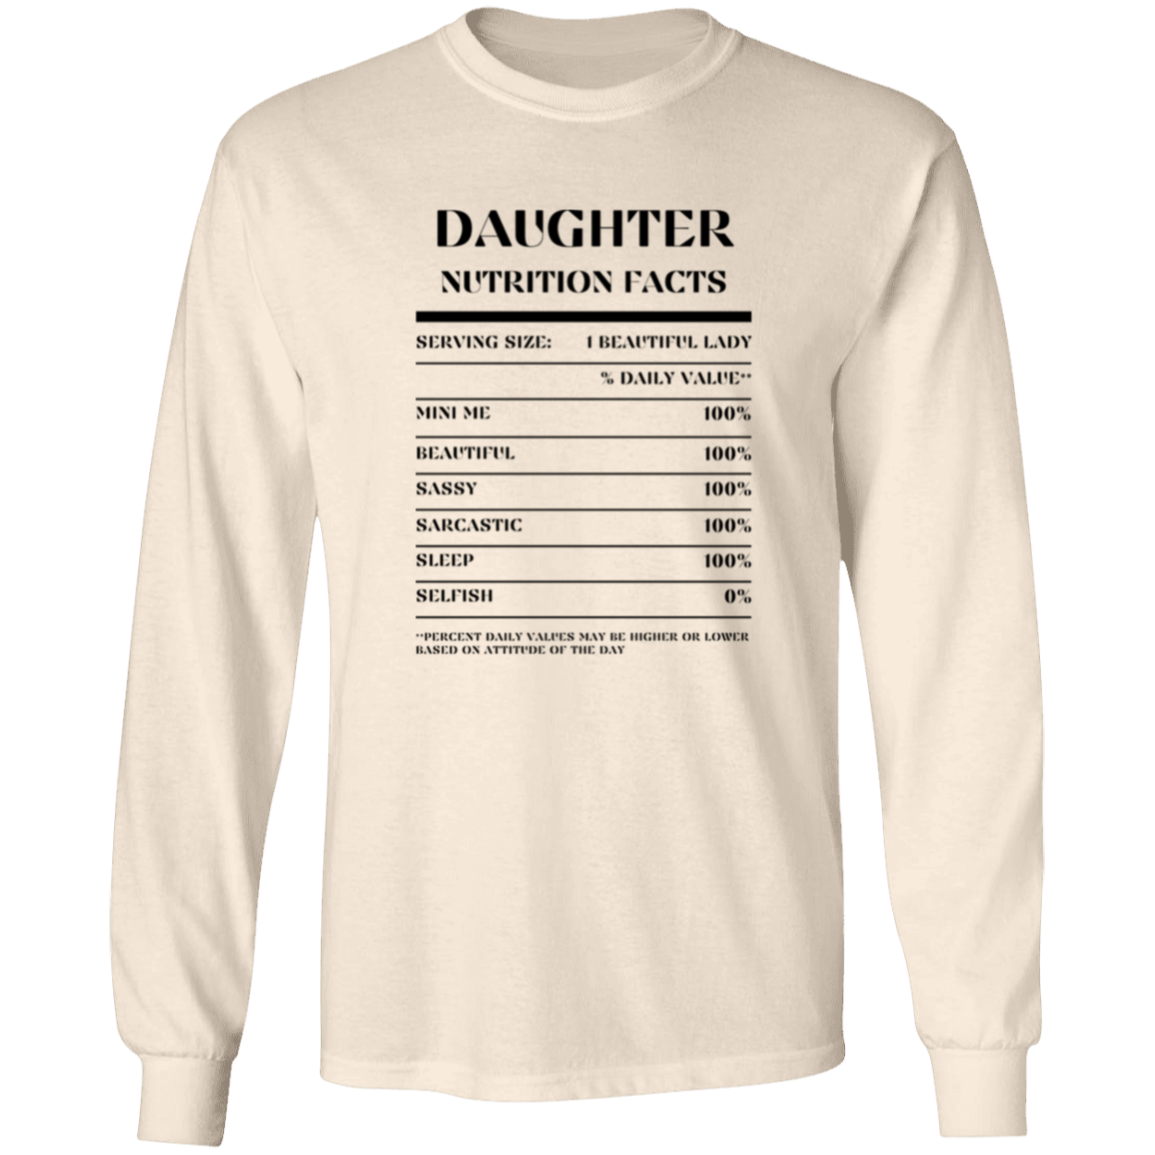 Nutrition Facts T-Shirt LS - Daughter - Black